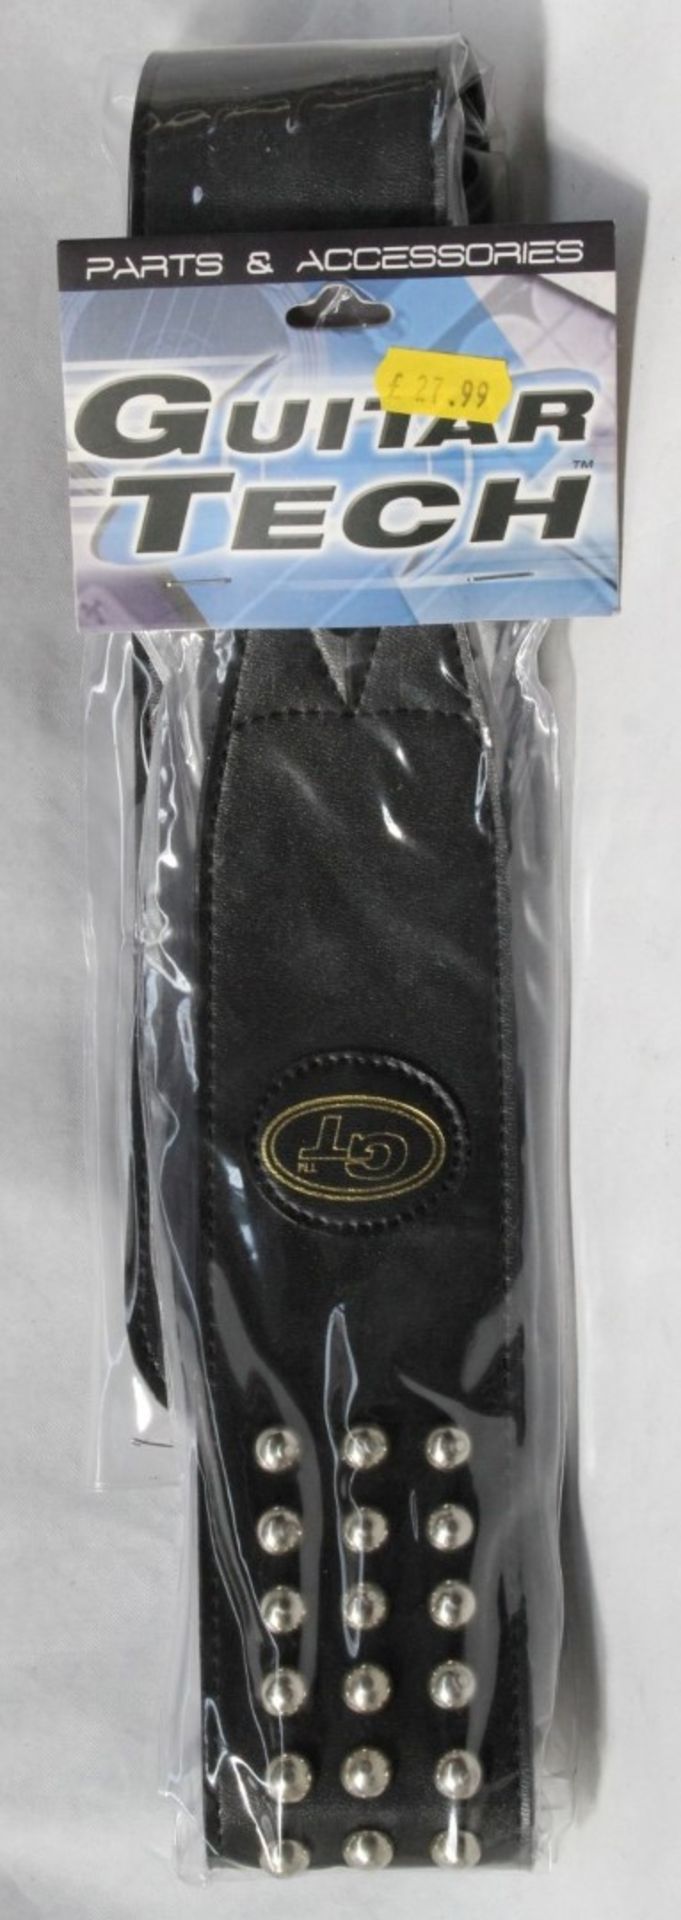 1 x Guitar Tech Leather Studded Guitar Strap - New in Packet - CL020 - Ref Pro160 - Location: - Image 3 of 6